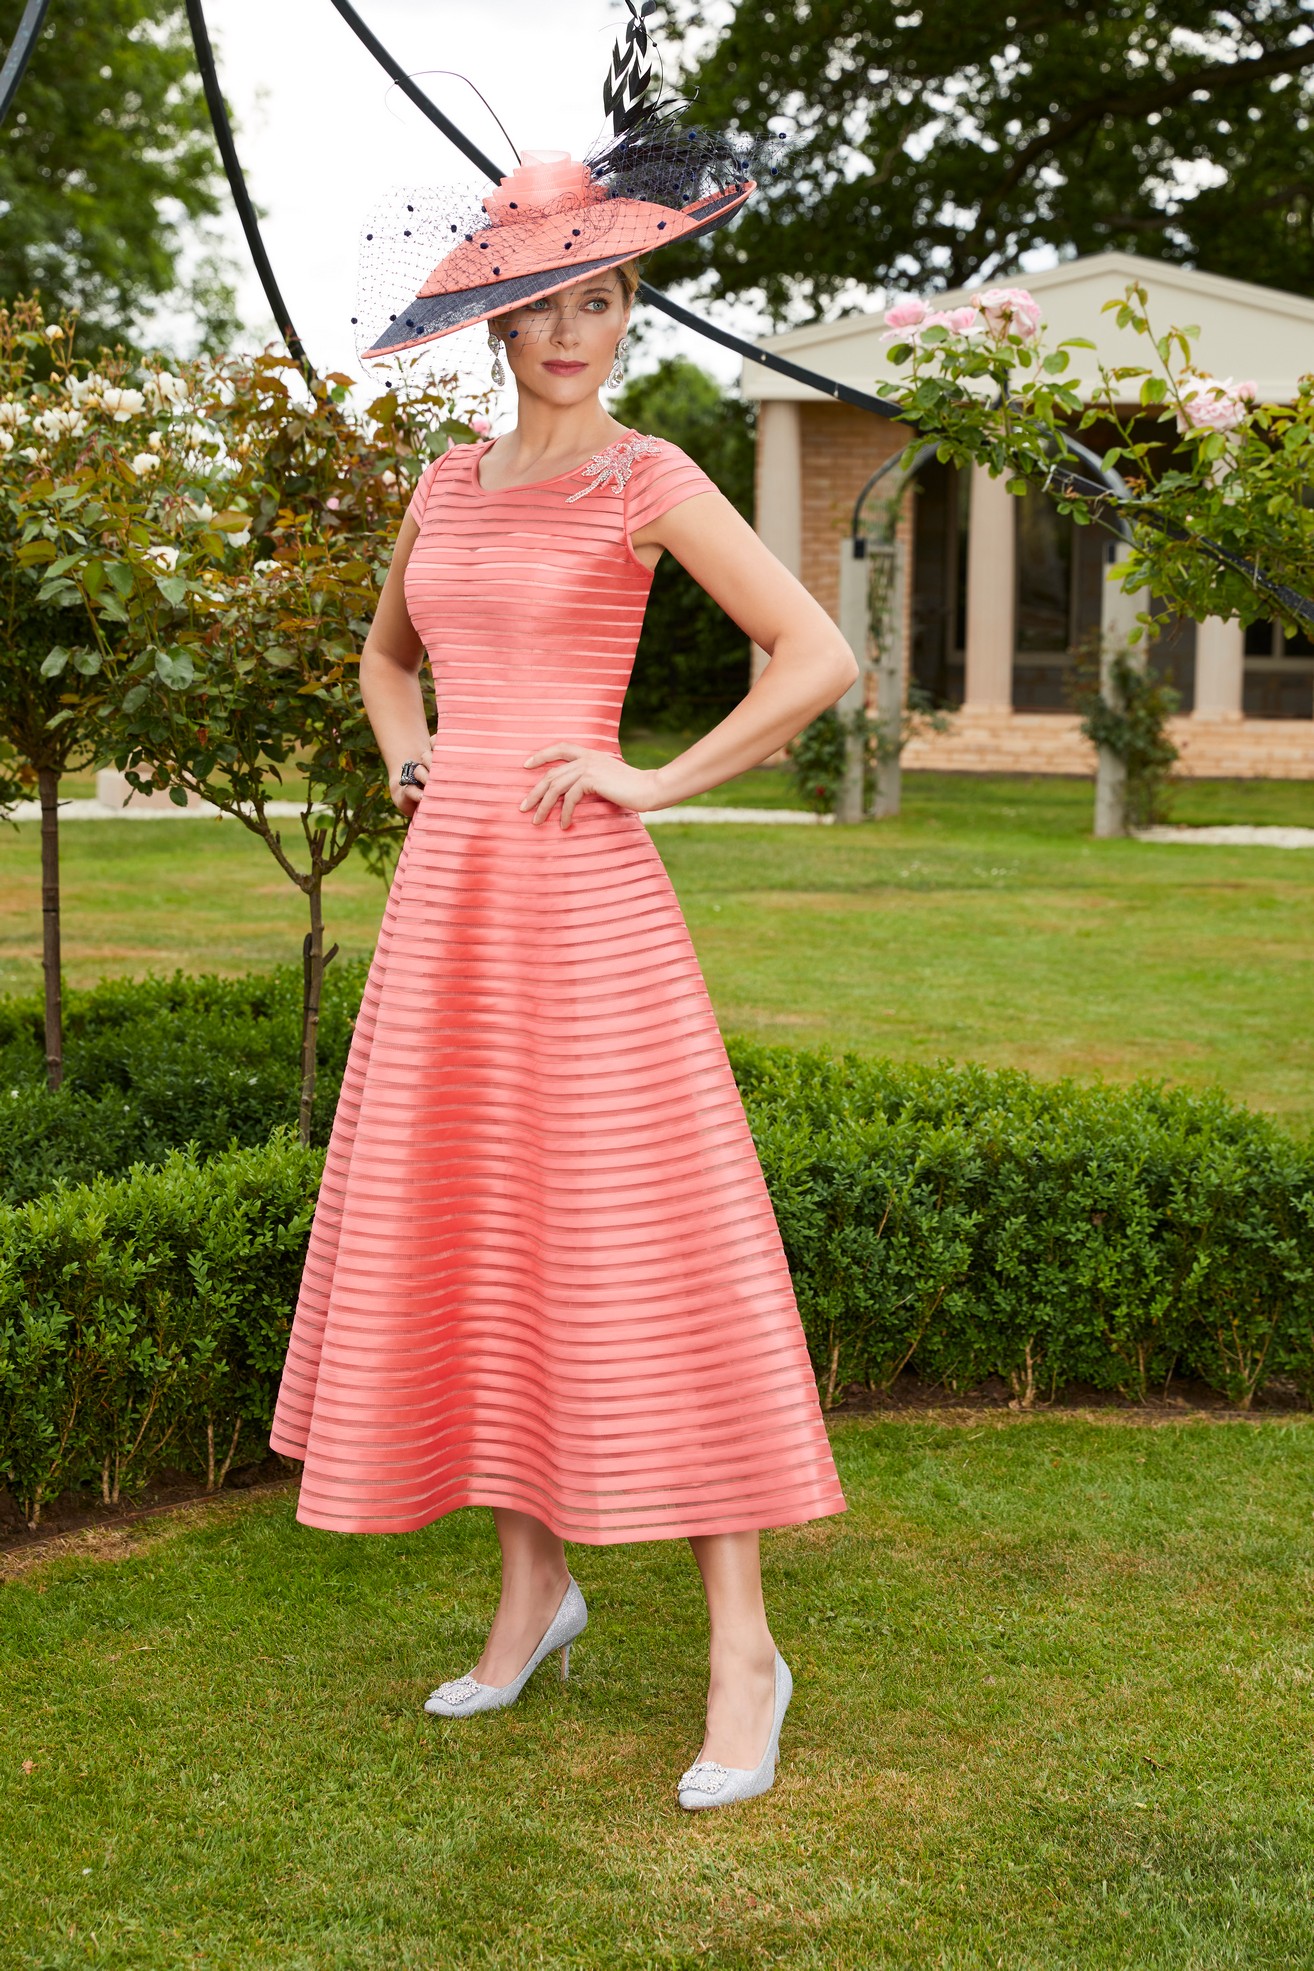 Lady in coral pink tea style a-line dress with cap sleeves and round neckline with matching fascinator hat and high heeled shoes standing in garden 